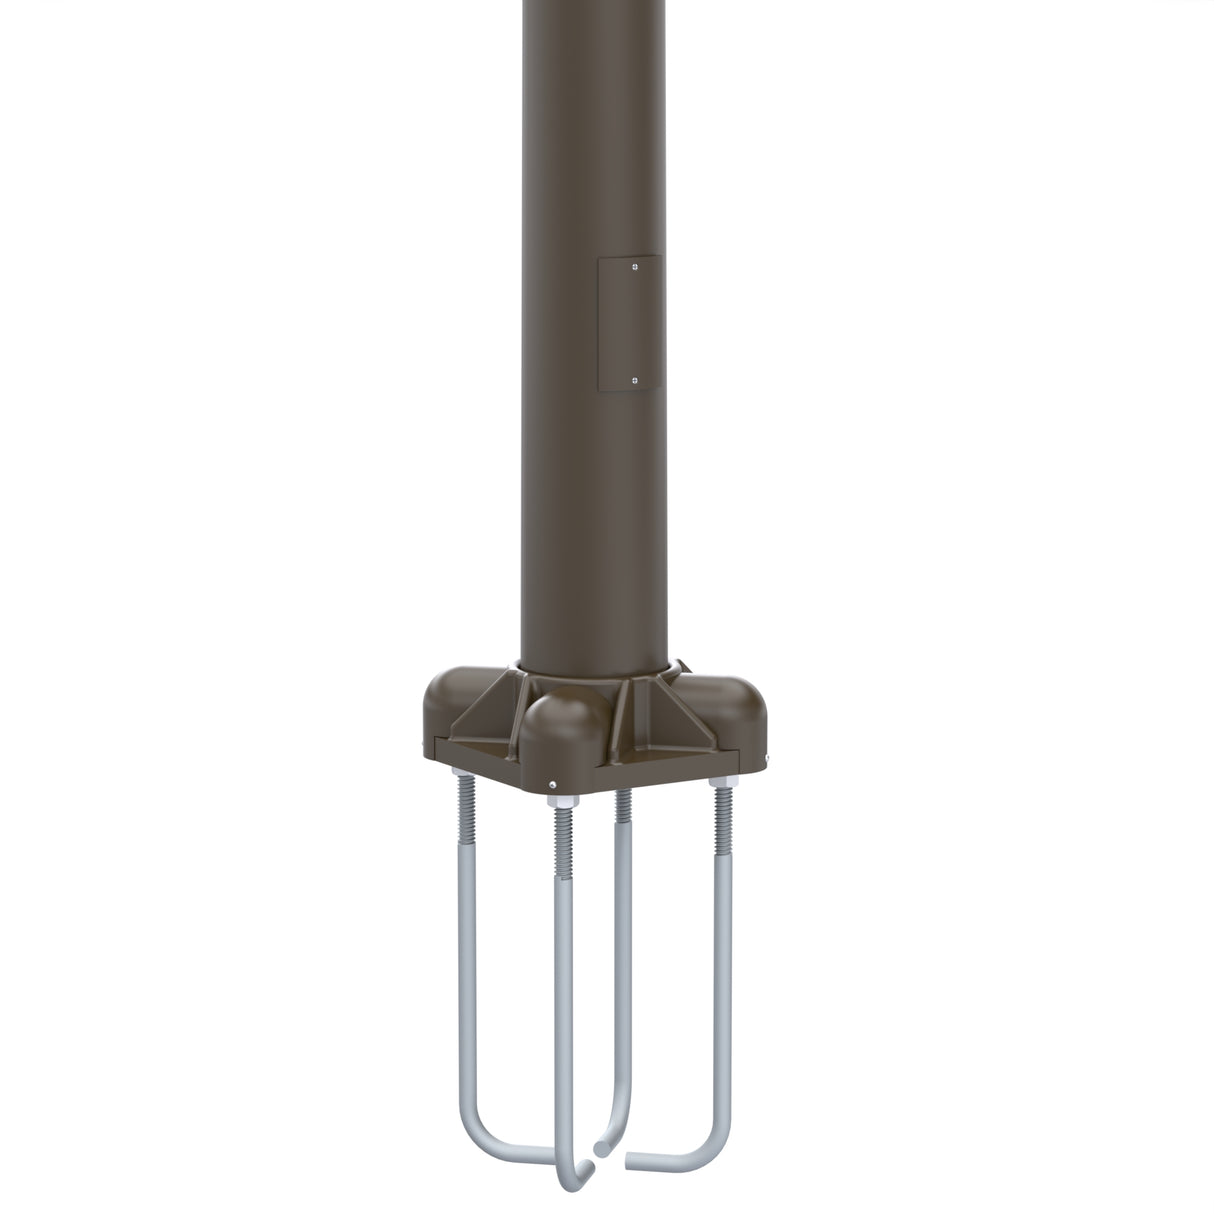 20' Tall x 7.0" Base OD x 4.0" Top OD x 0.156" Thick, Round Tapered Aluminum, Anchor Base Light Pole